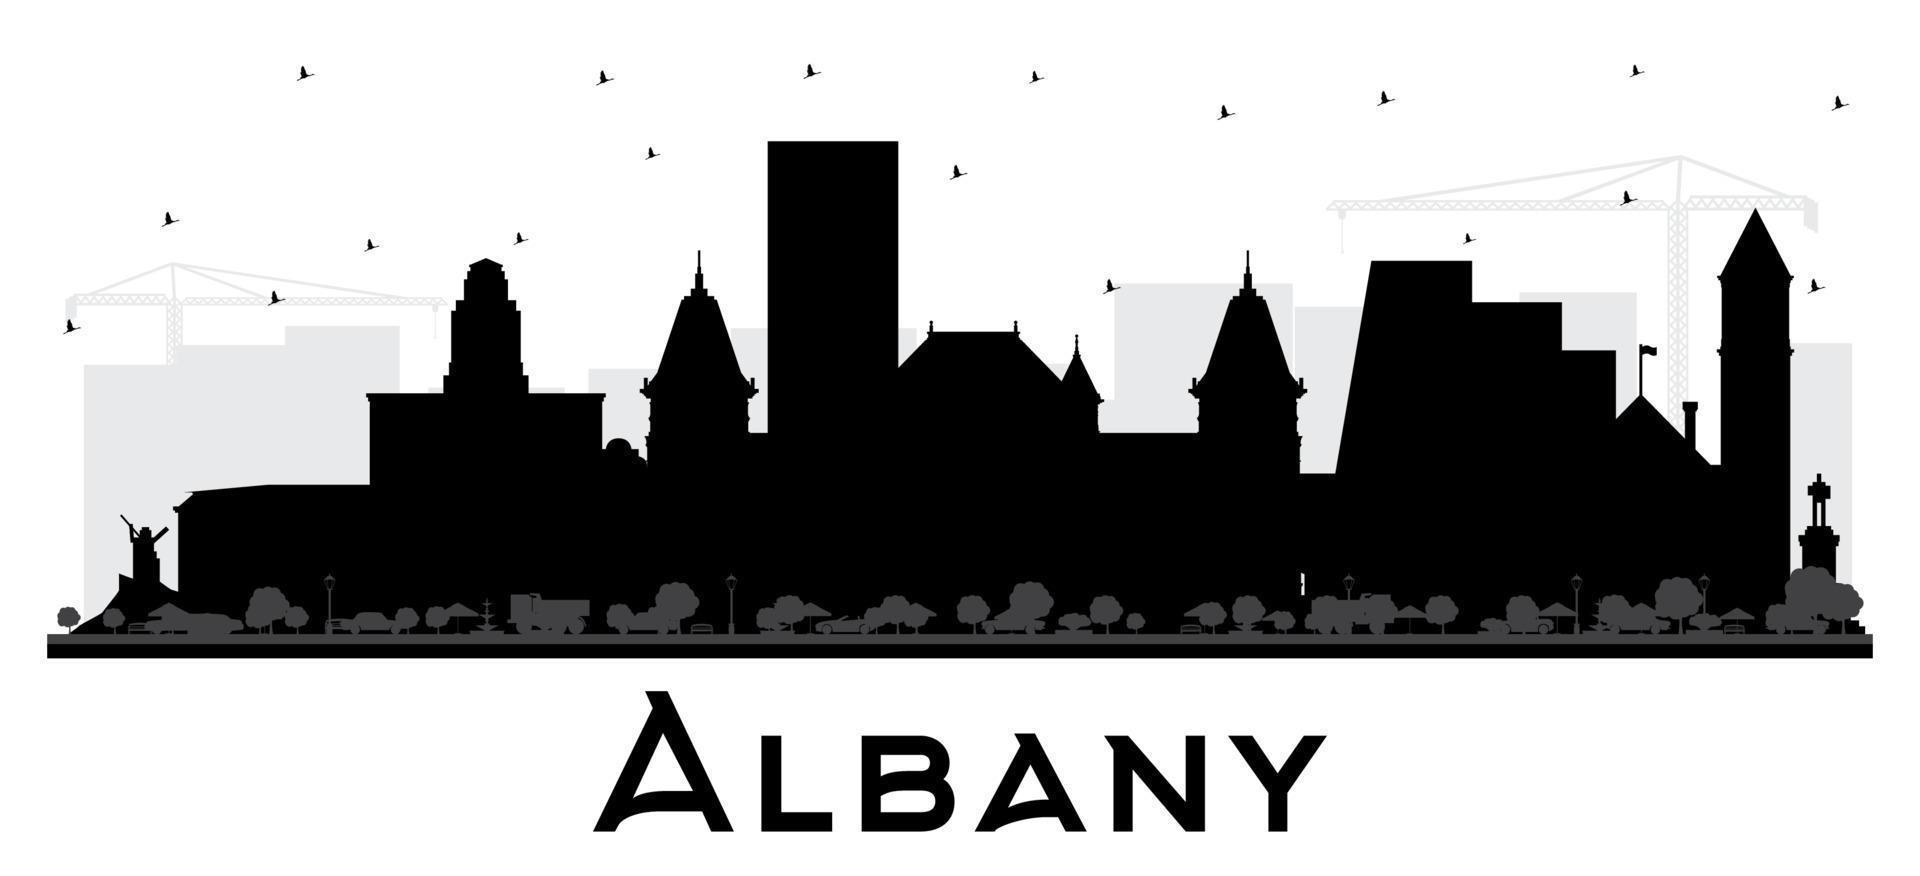 Albany New York City Skyline Silhouette with Black Buildings Isolated on White. vector